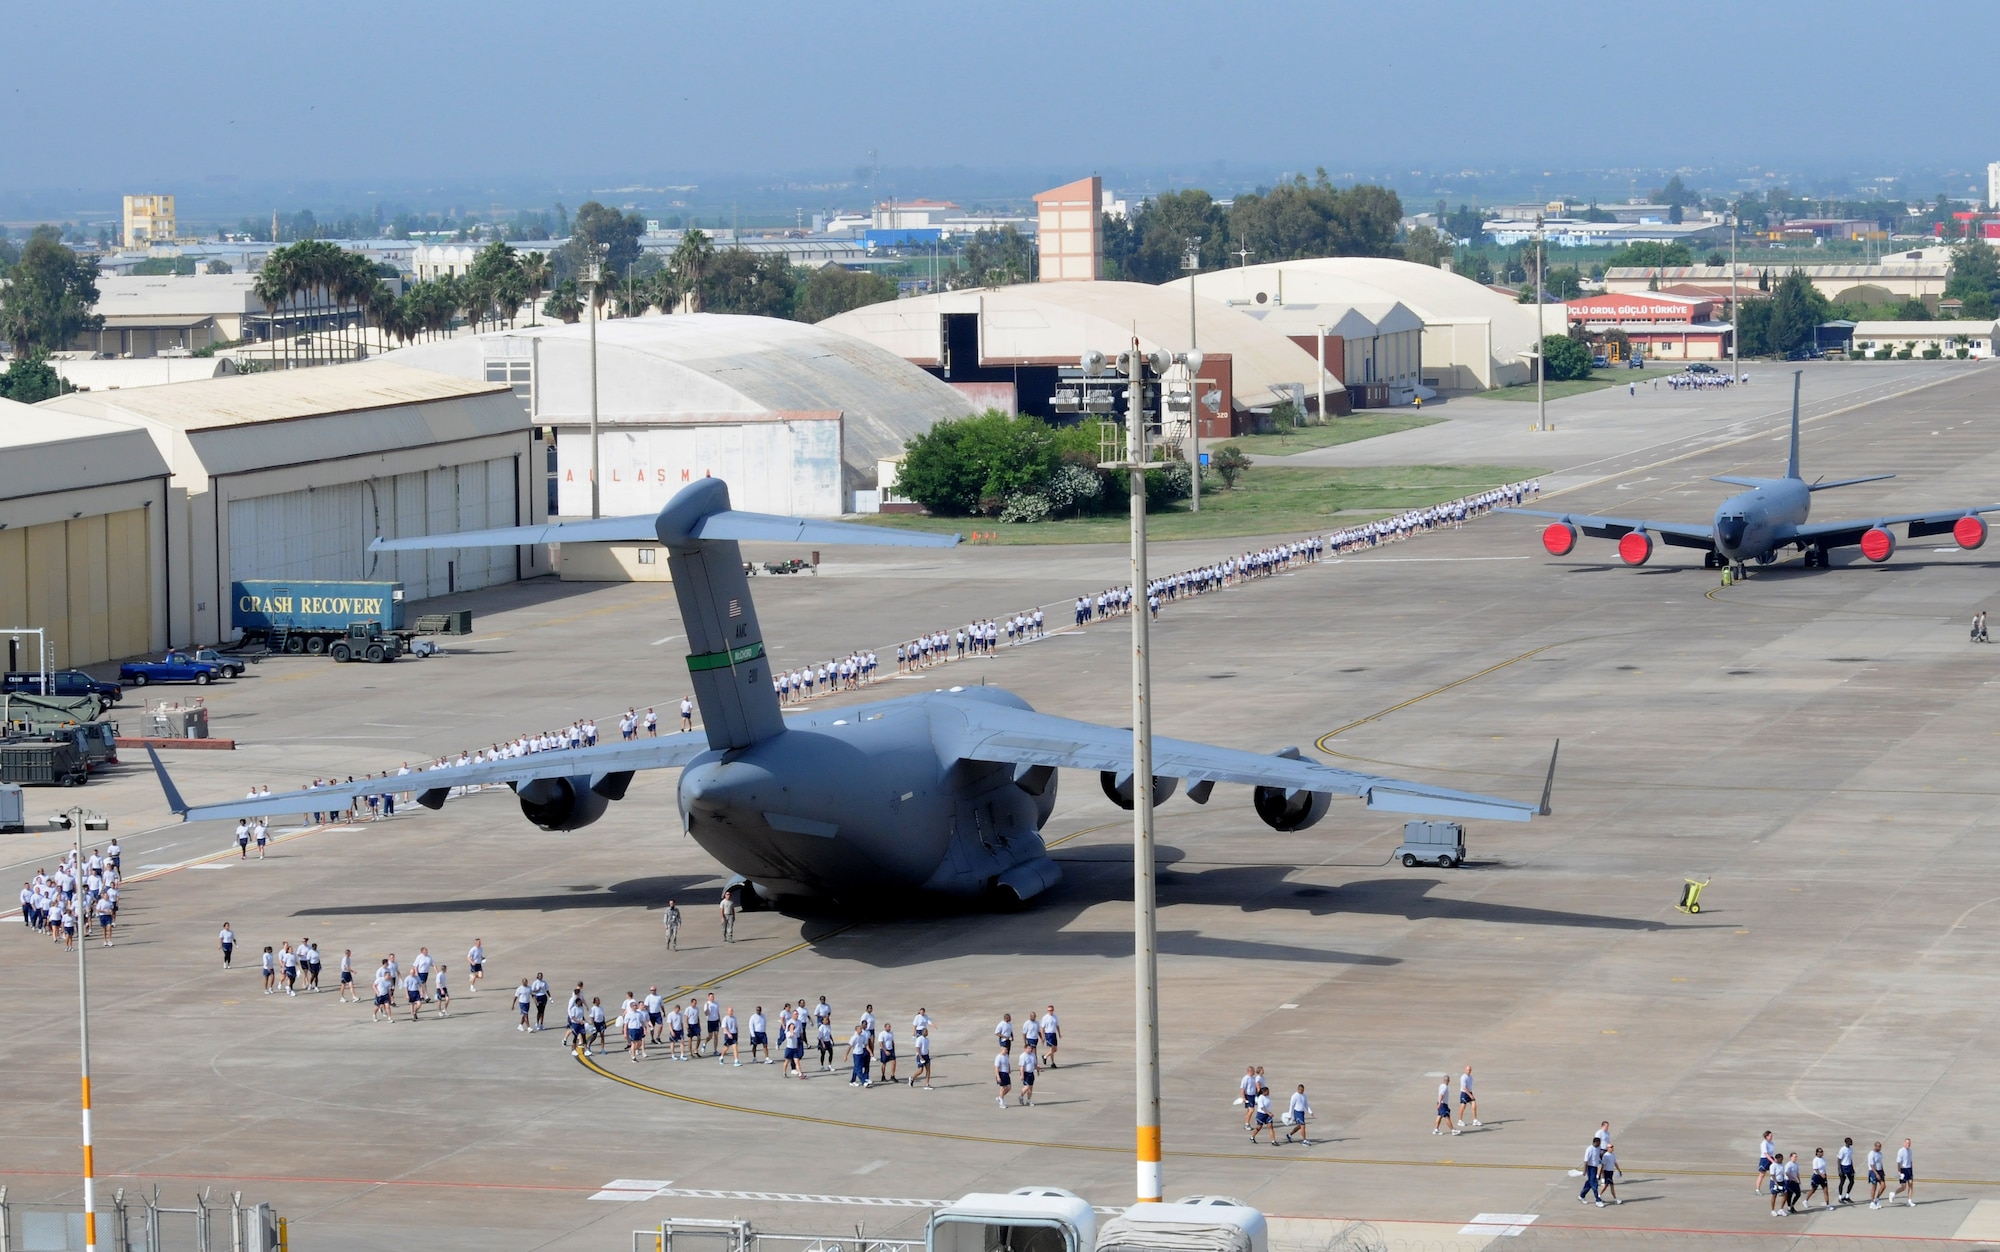 Airmen spread out around the flightline to begin a foreign-object-debris walk to remove trash and other objects from the area May 29, 2012, at Incirlik Air Base, Turkey. The FOD walk was a combined effort between the 39th Air Base Wing and Turkish air force 10th Tanker Base Command to clear the area of  debris that could potentially damage aircraft engines. (U.S. Air Force photo by Senior Airman Marissa Tucker/Released)
